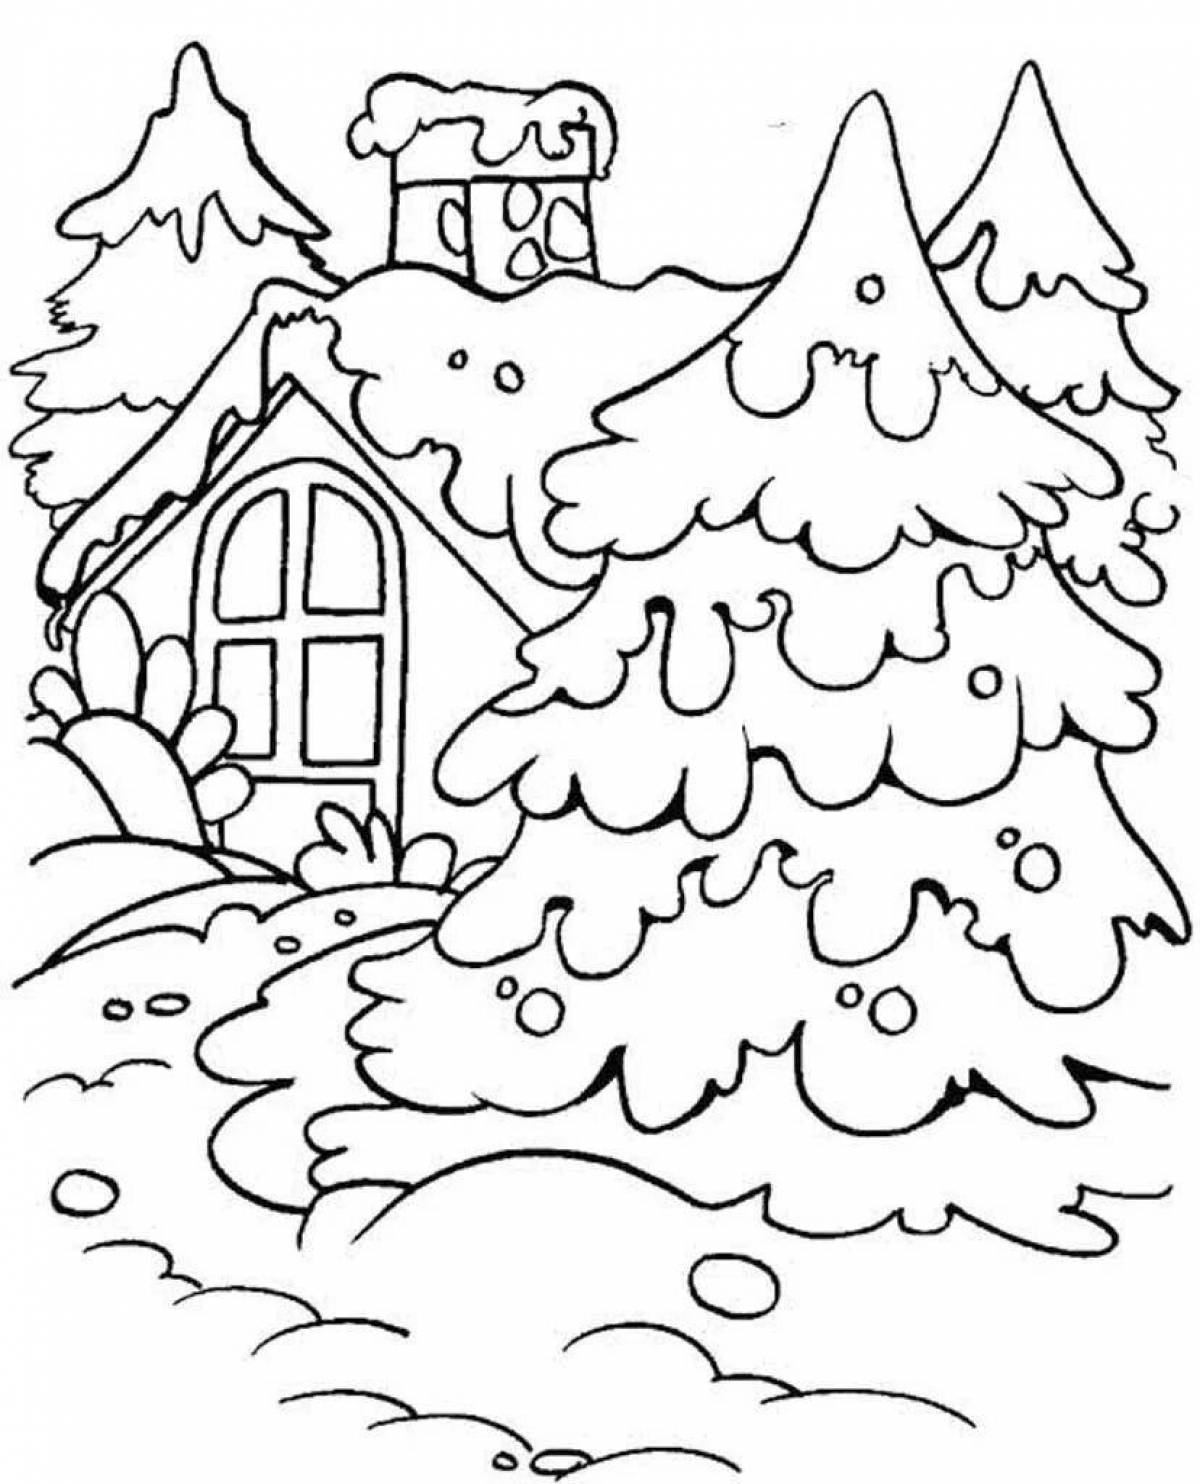 Merry winter forest coloring book for 4-5 year olds